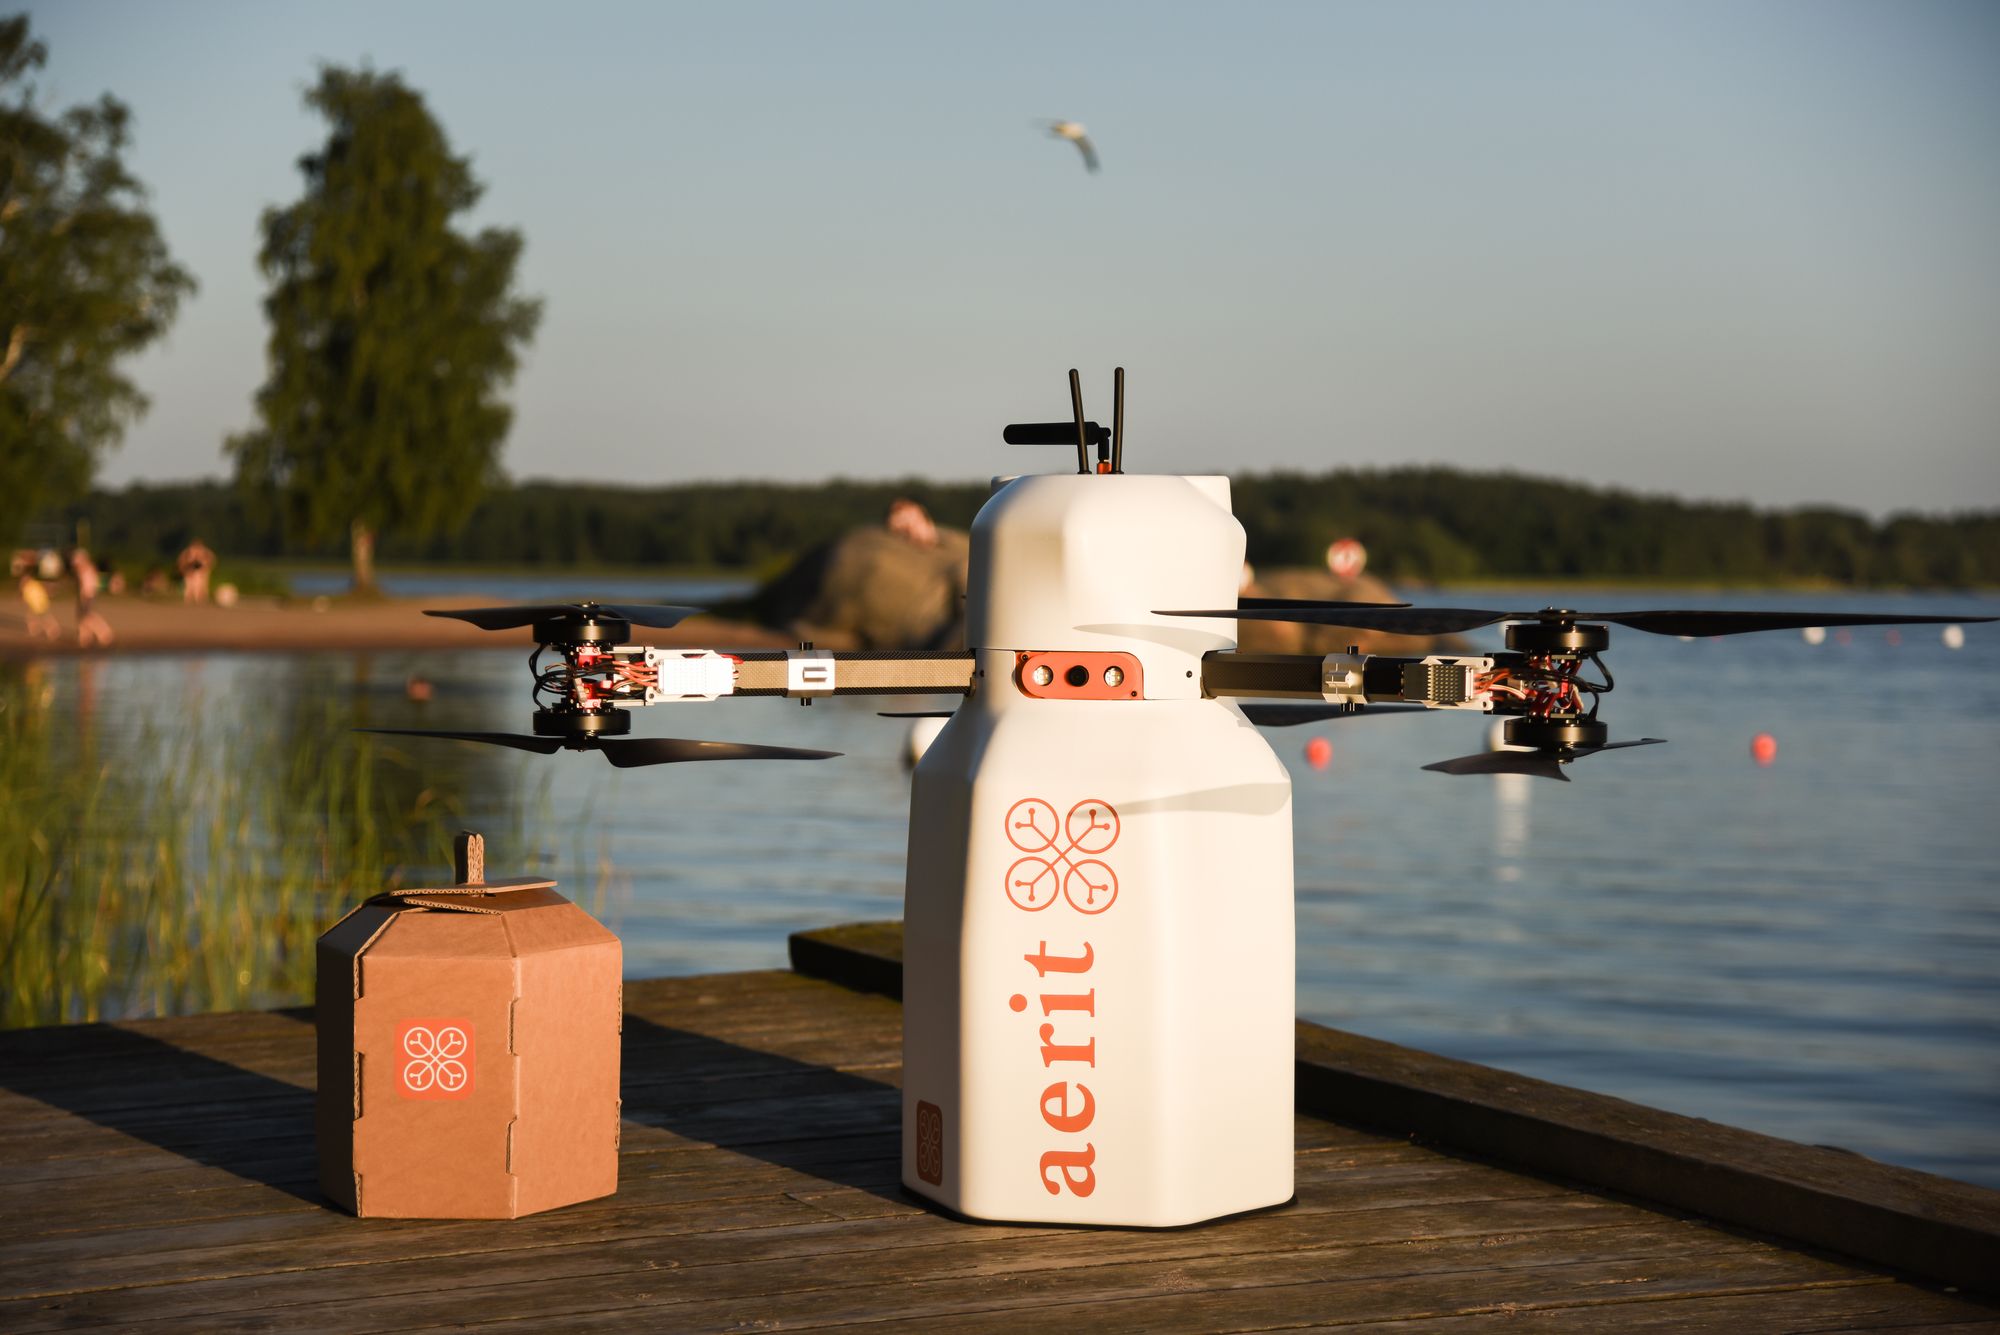 Startup Aerit awarded thumbs-up from Transportstyrelsen to conduct drone delivery